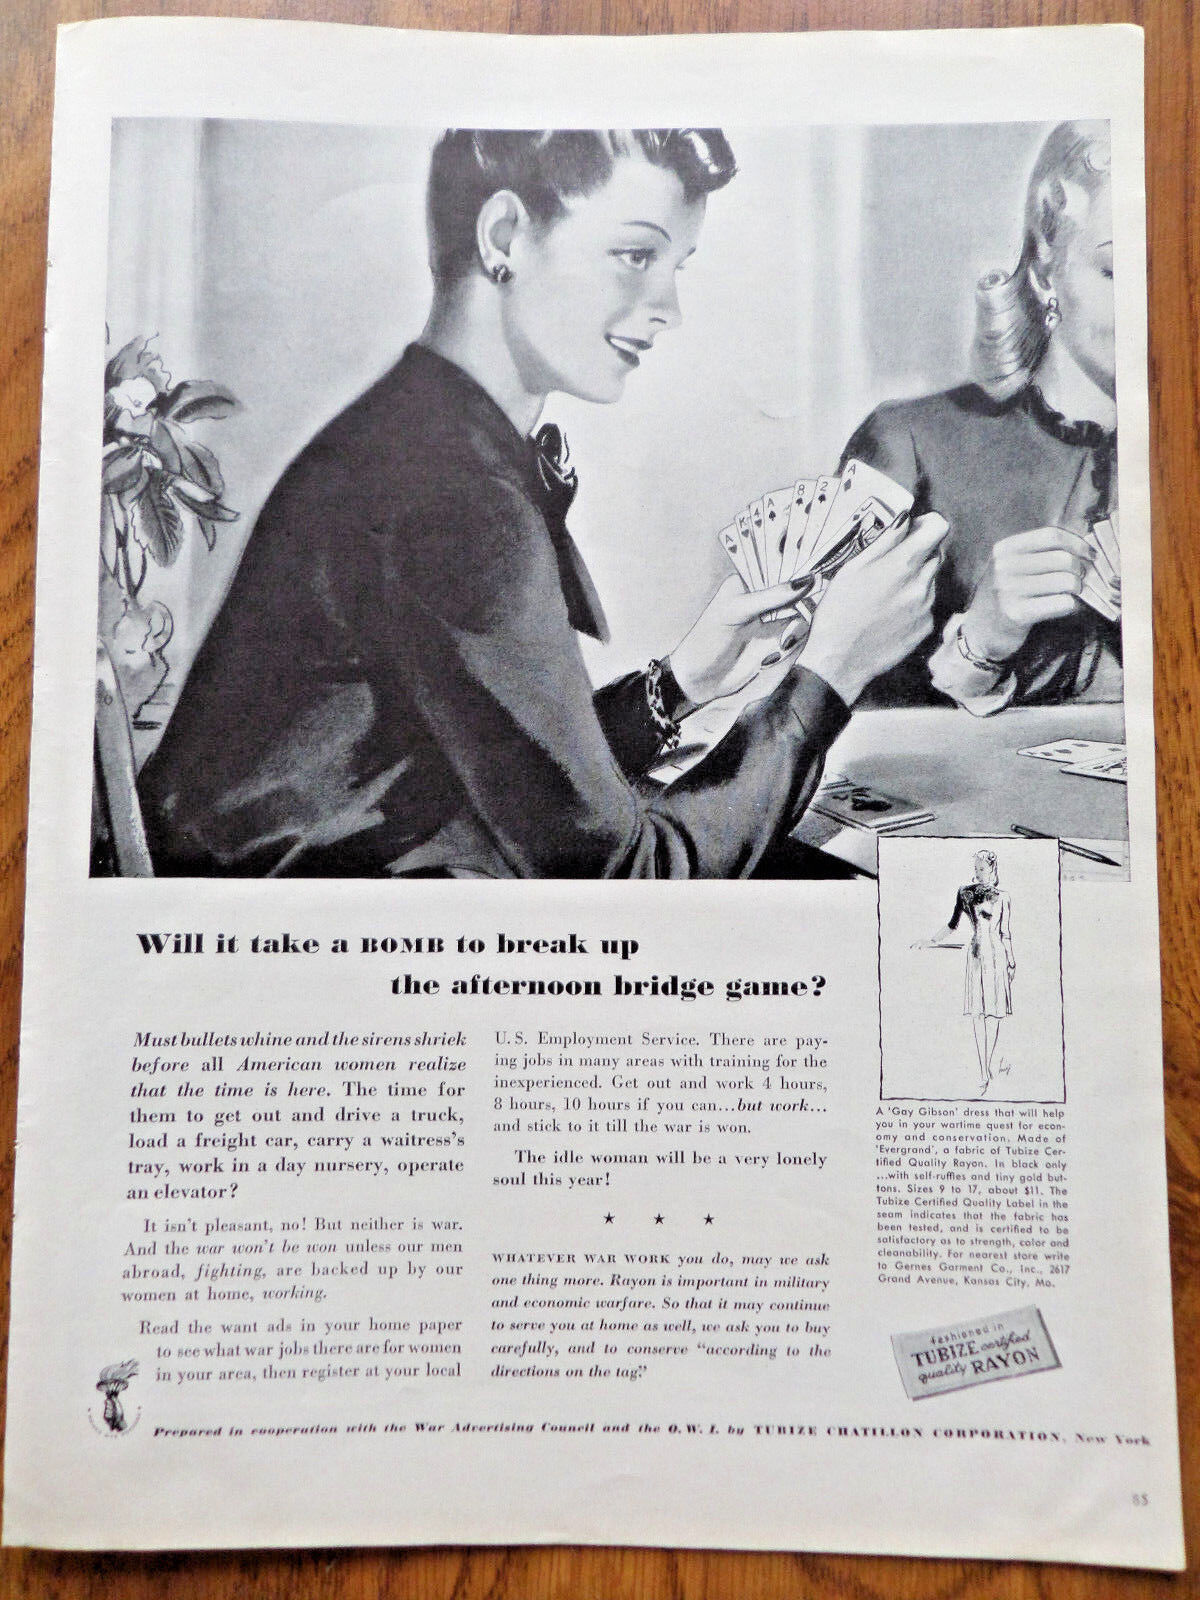 1943 War Advertising Council Ad  Will it take a BOMB to Break Up Bridge Game?